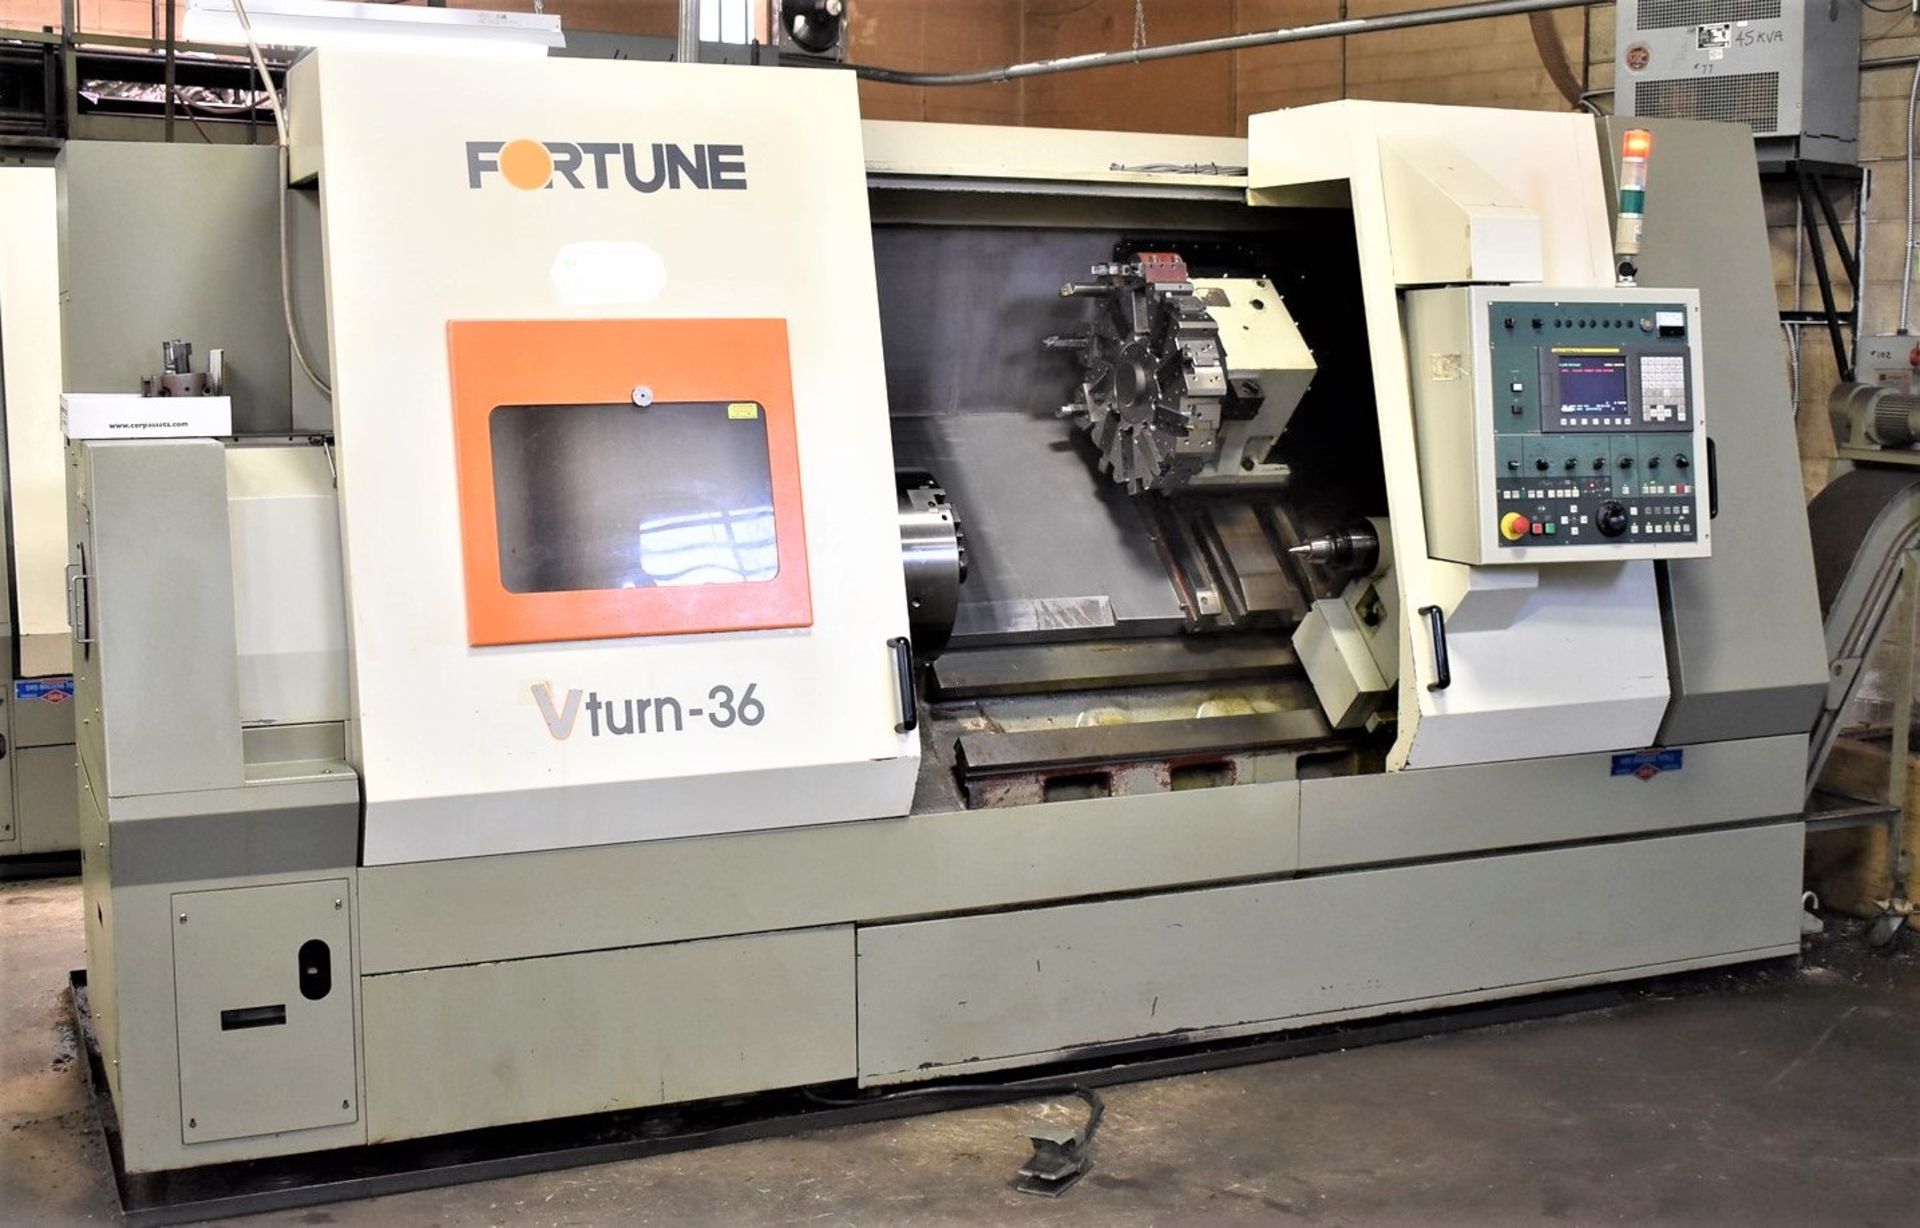 21.65" x 35" Victor (Fortune) Mdl Vturn-36 2-Axis CNC Lathe, S/N MD-1636, New 2007 - Image 10 of 10